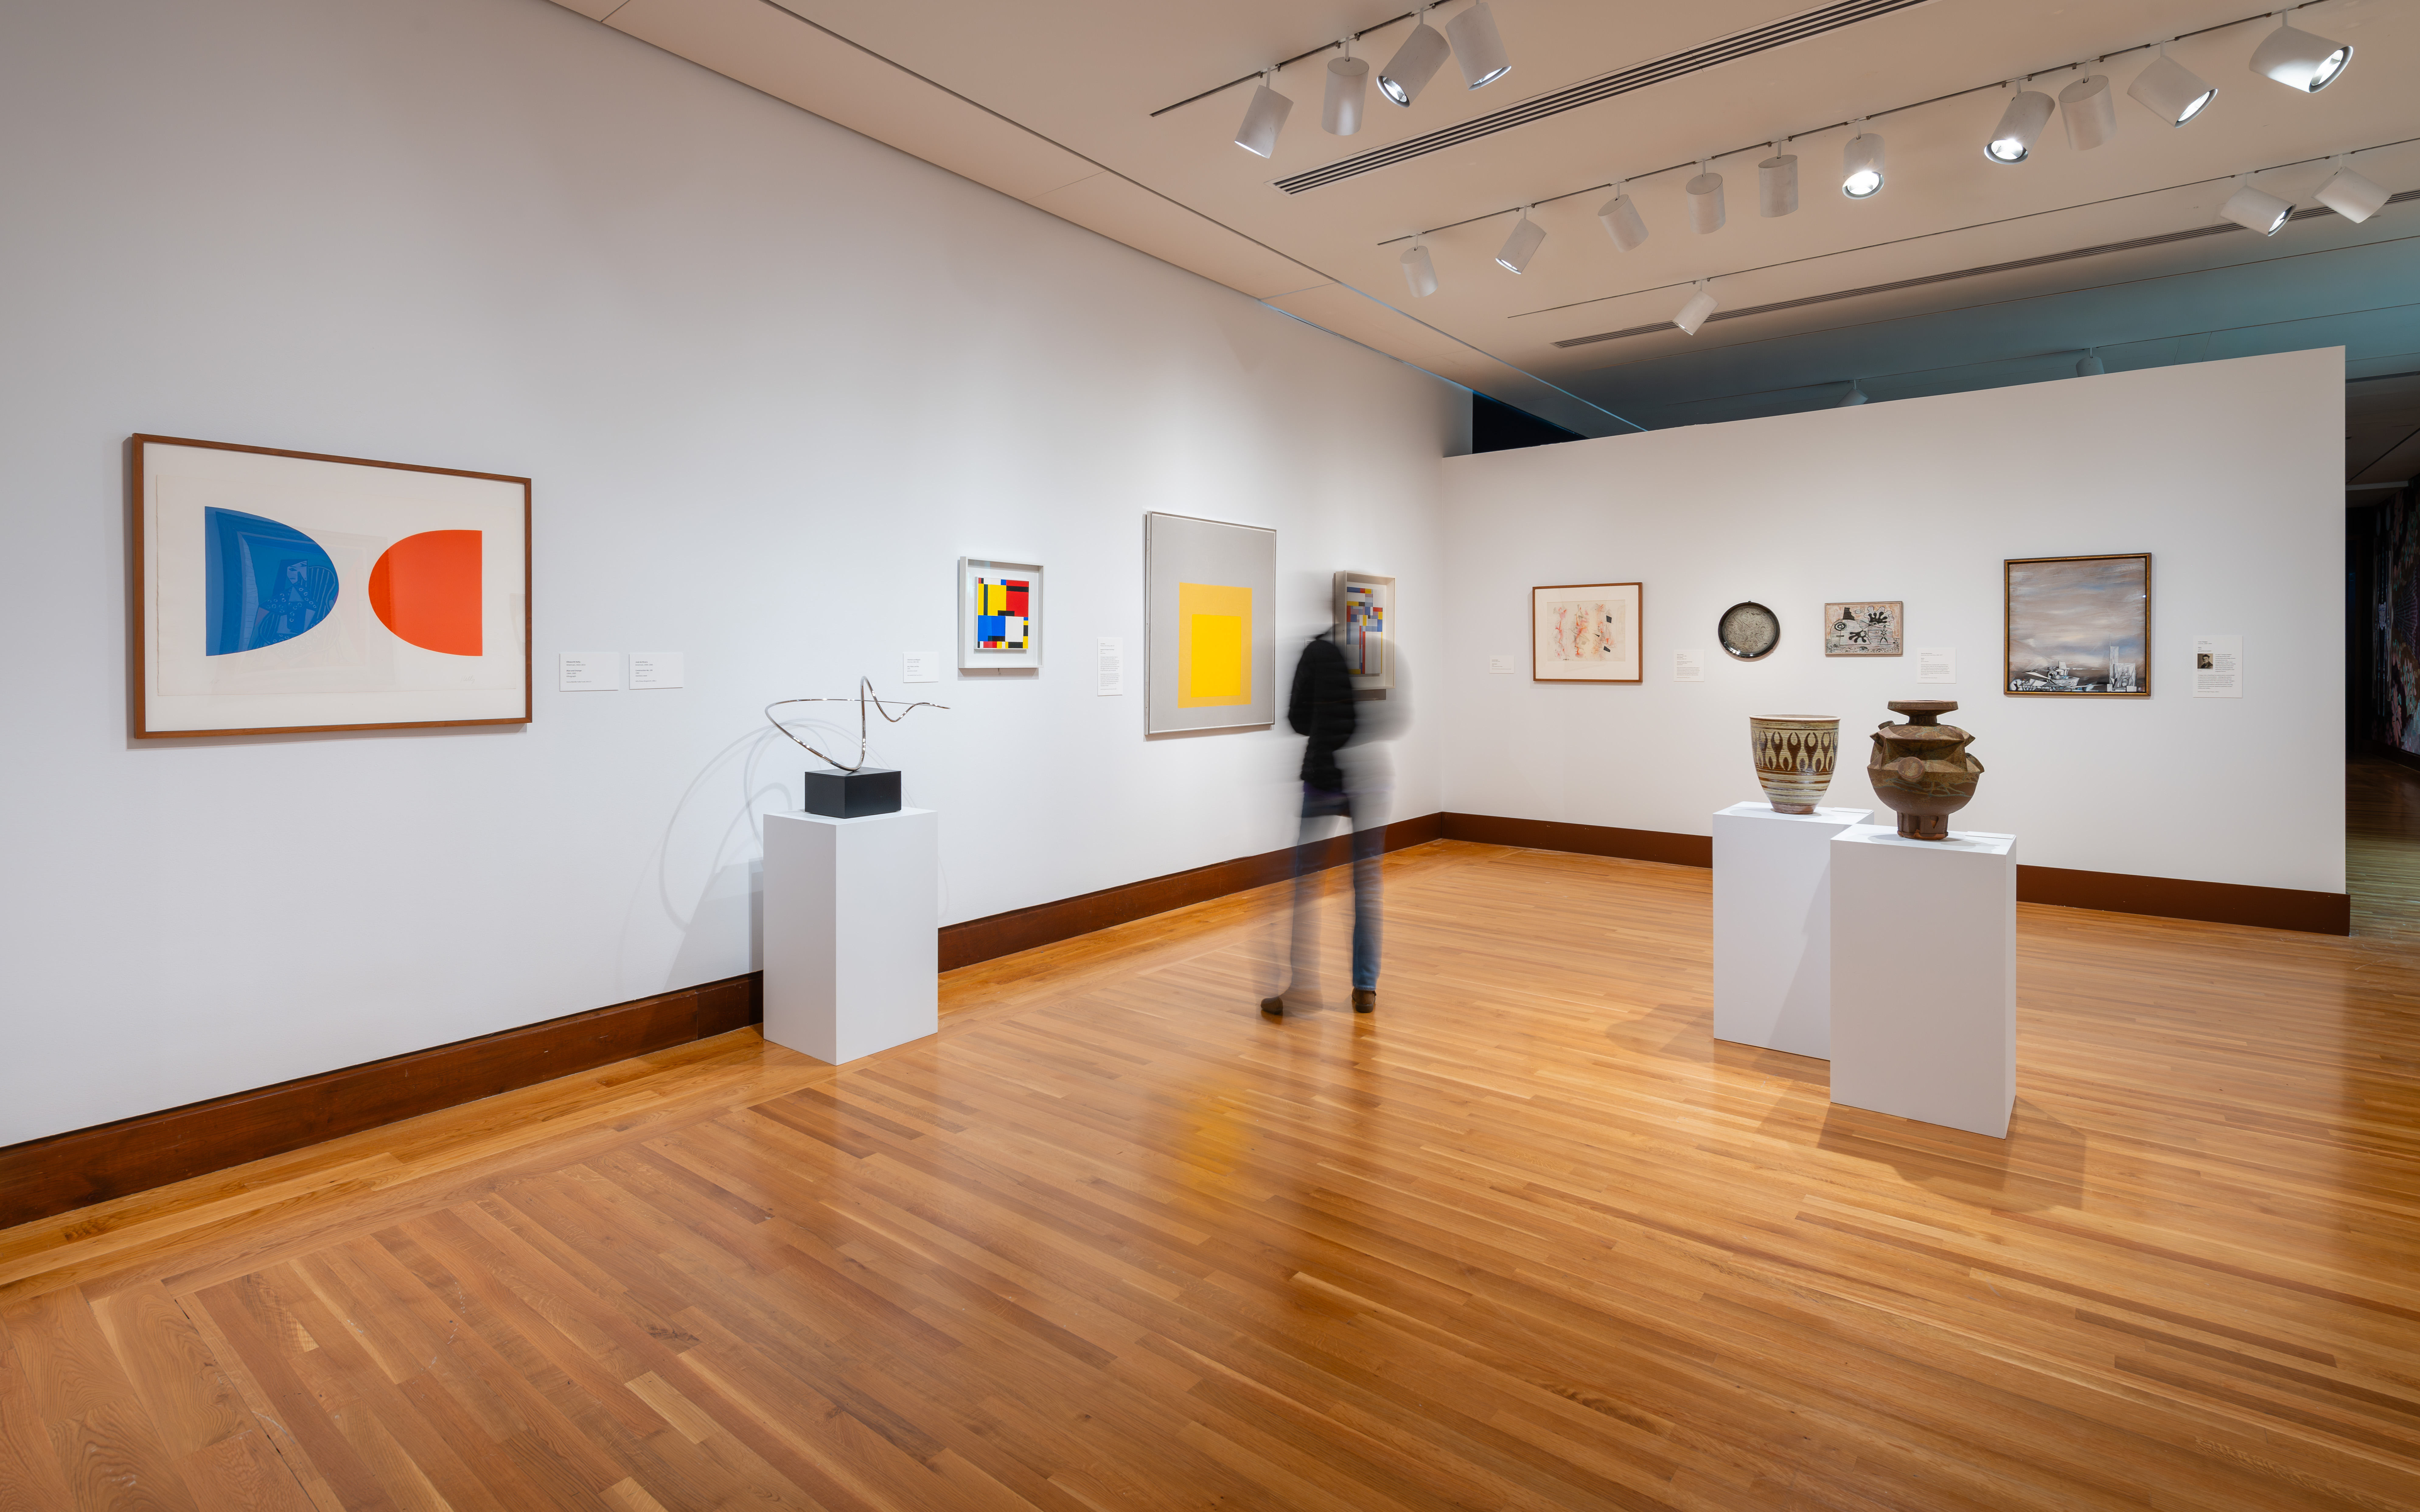 A female museum guest views a work by Josef Albers in an art gallery with paintings and sculptures on view